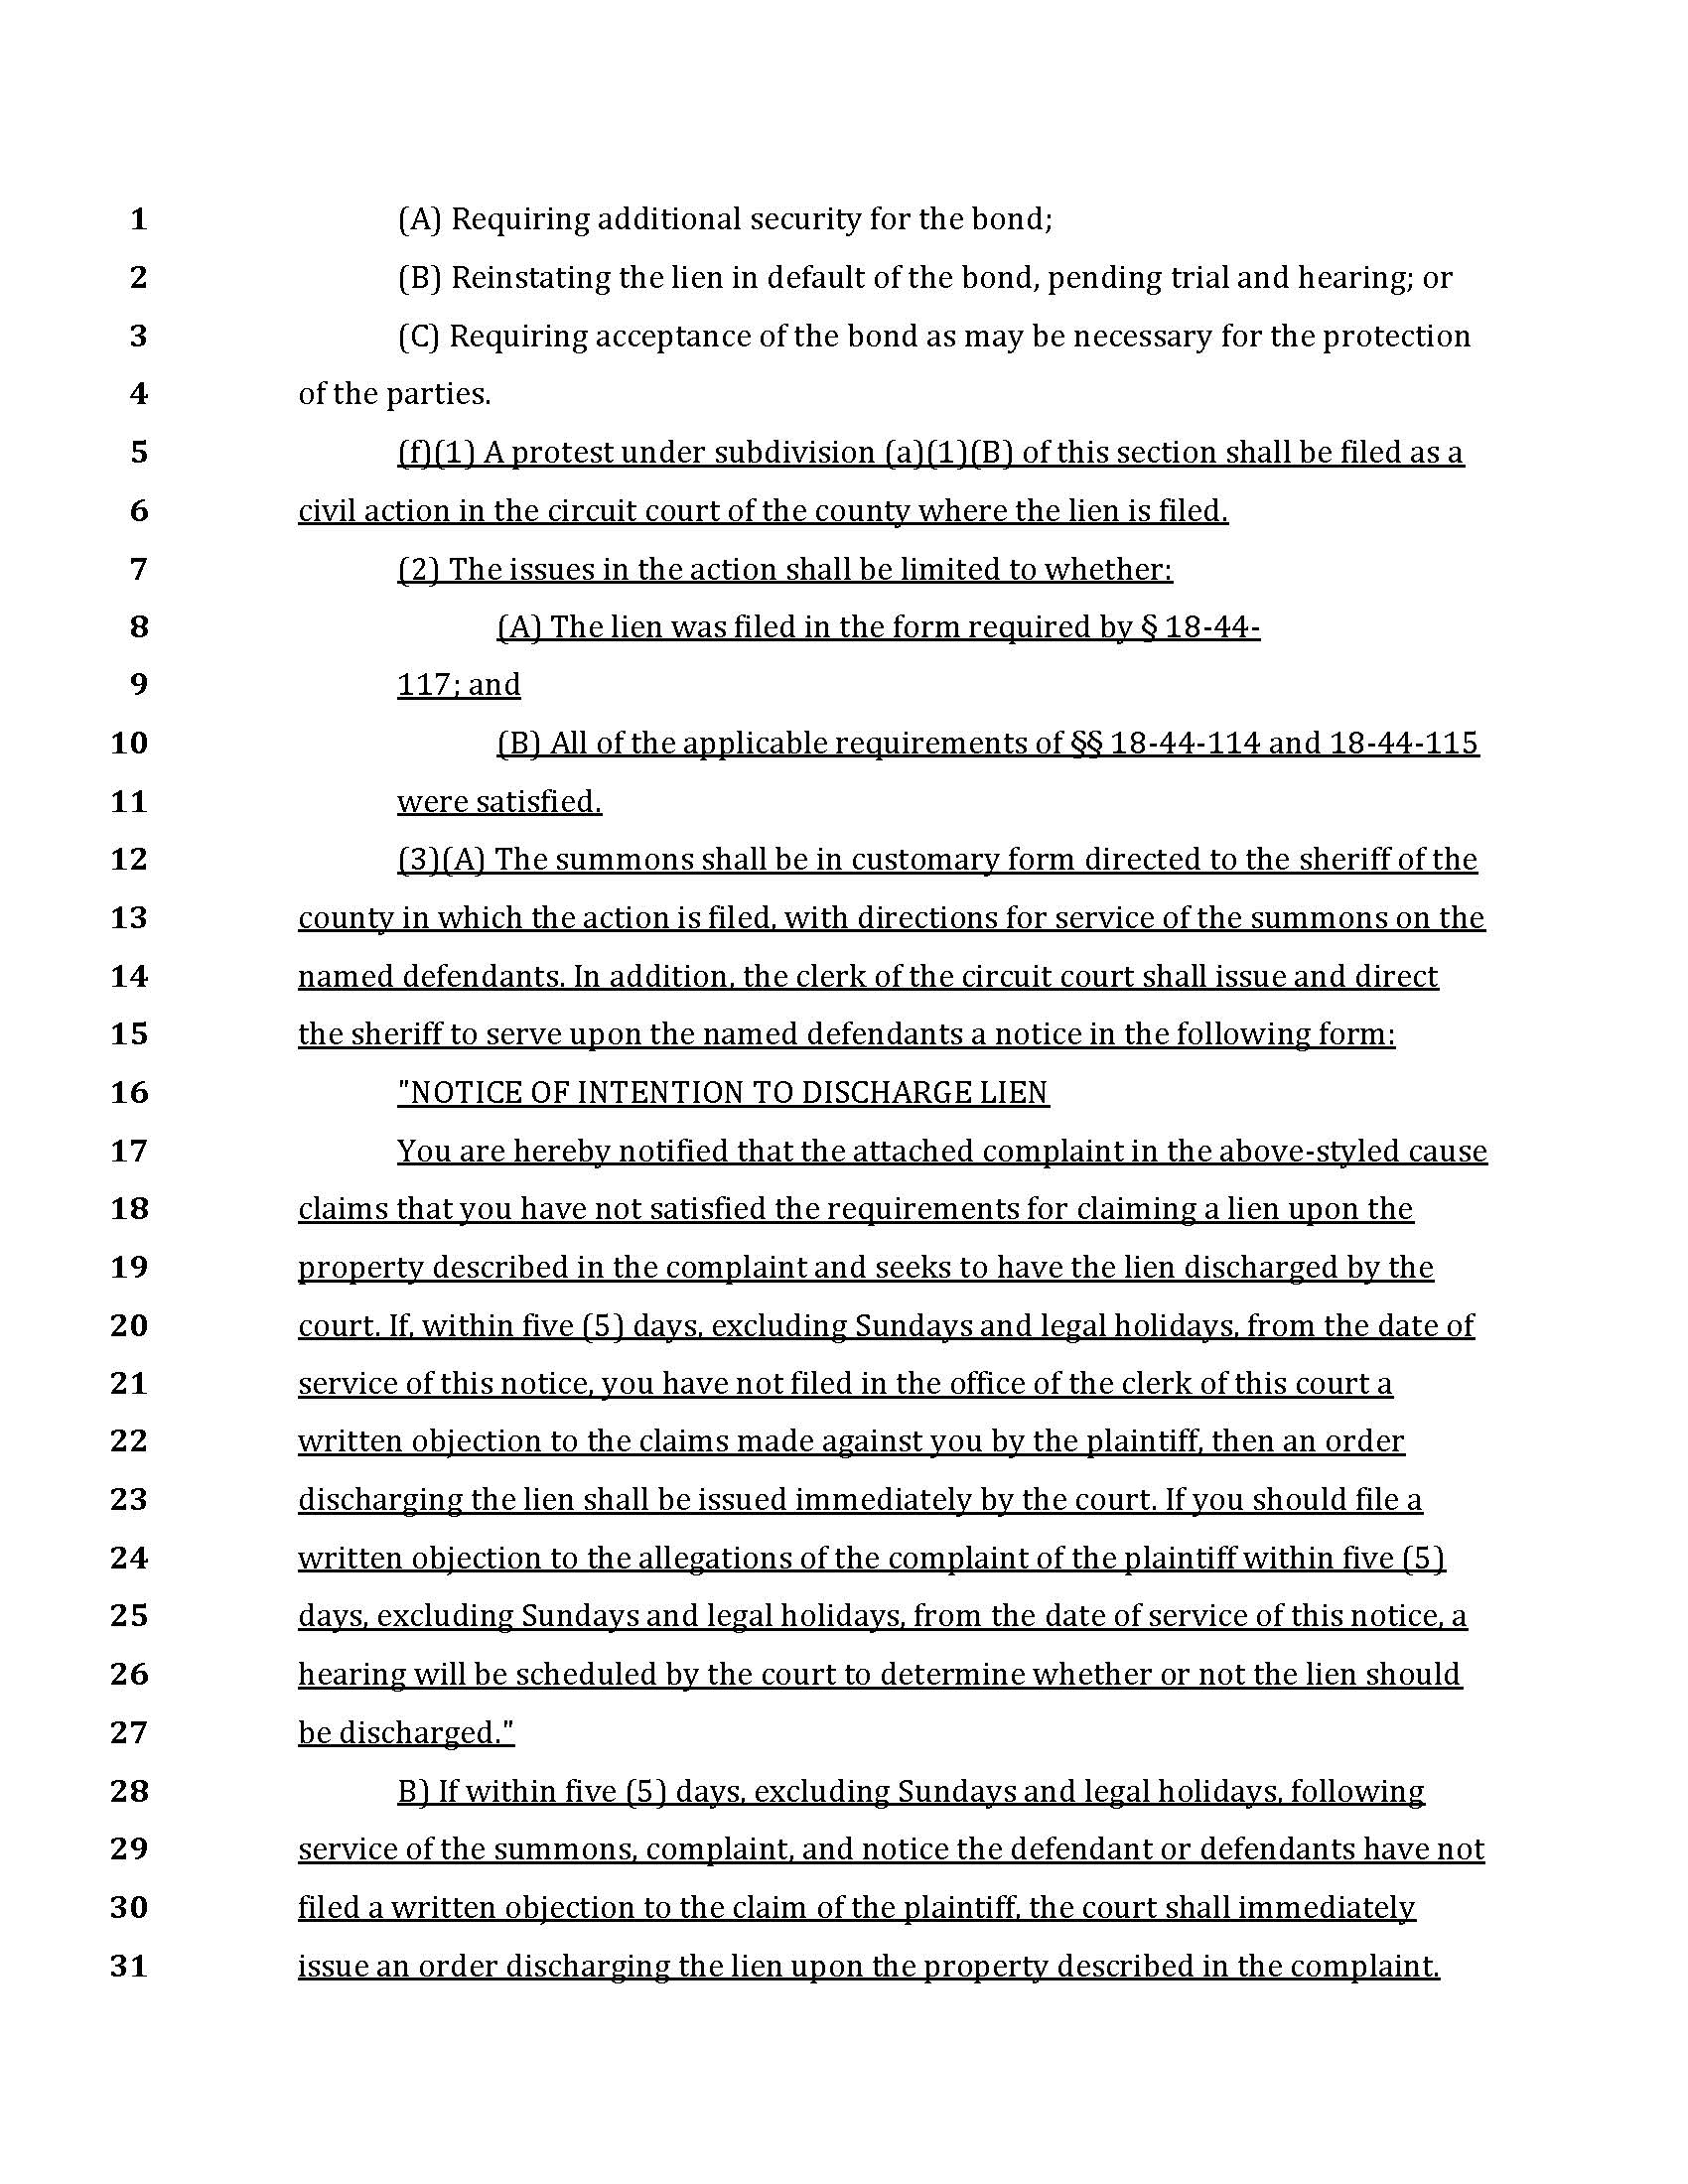 final-bill-lien-law-revisions_Page_13.jpg